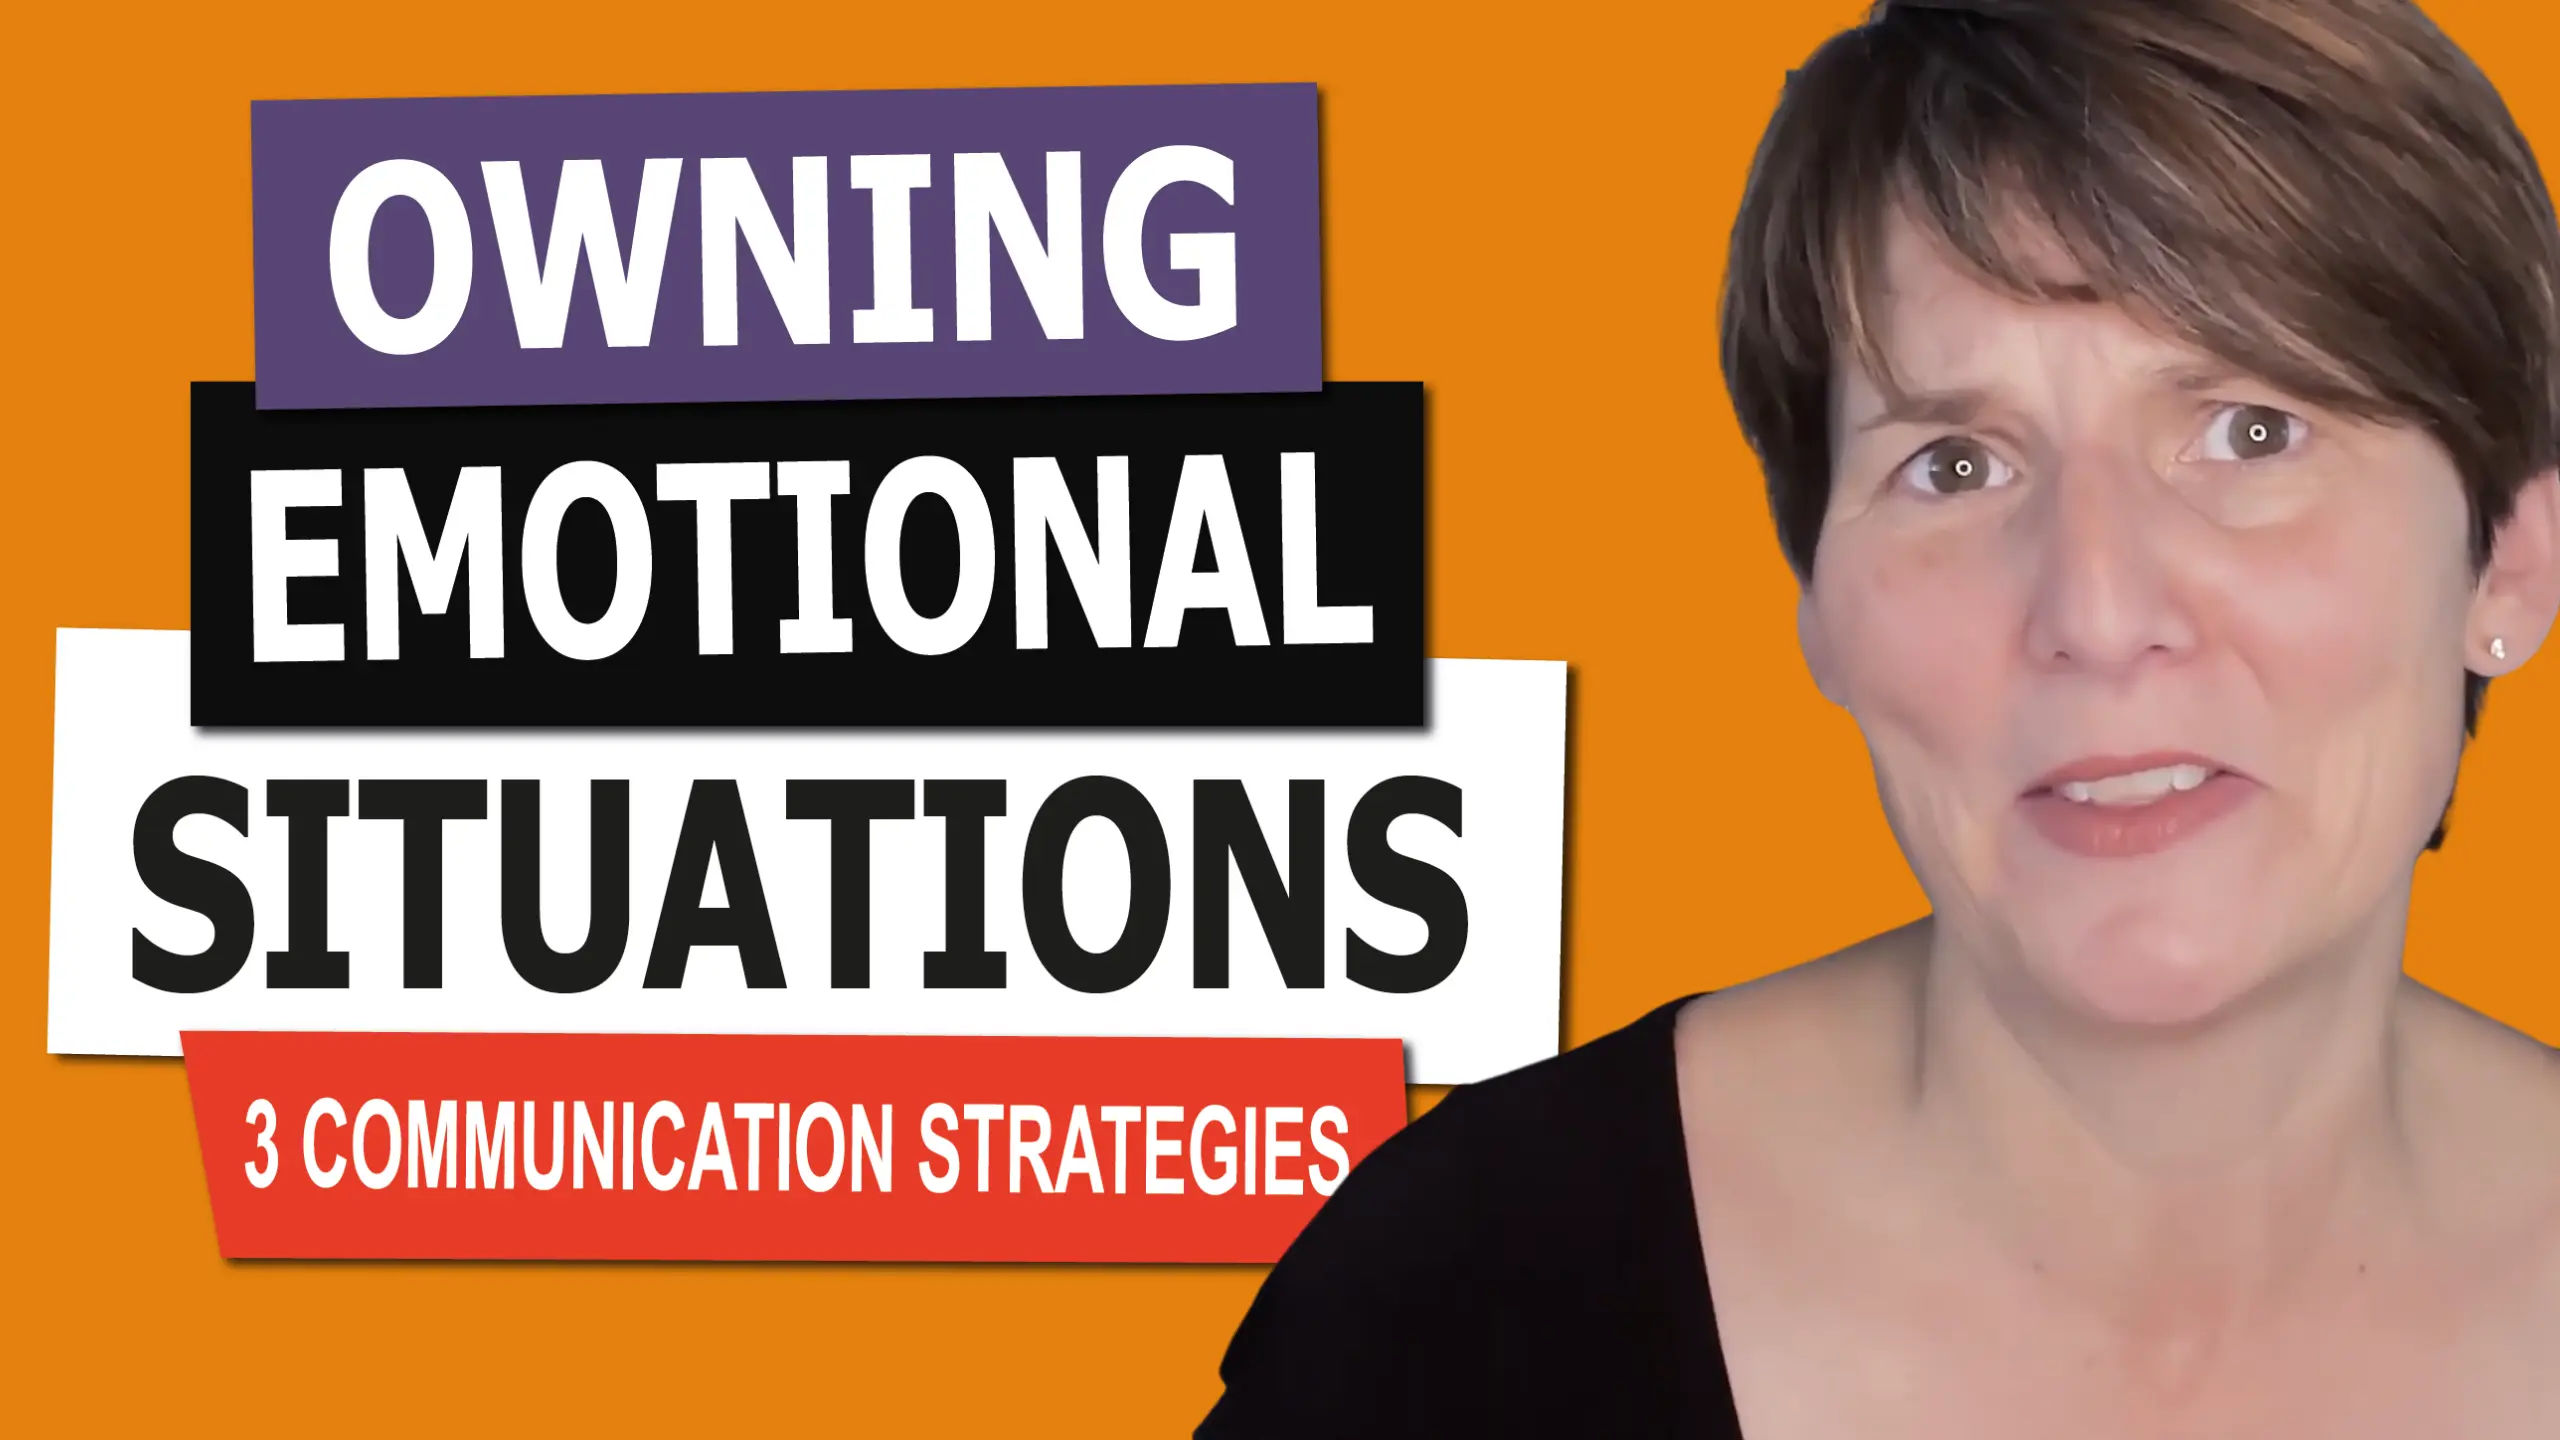 Owning Emotional Situations with Liane Davey